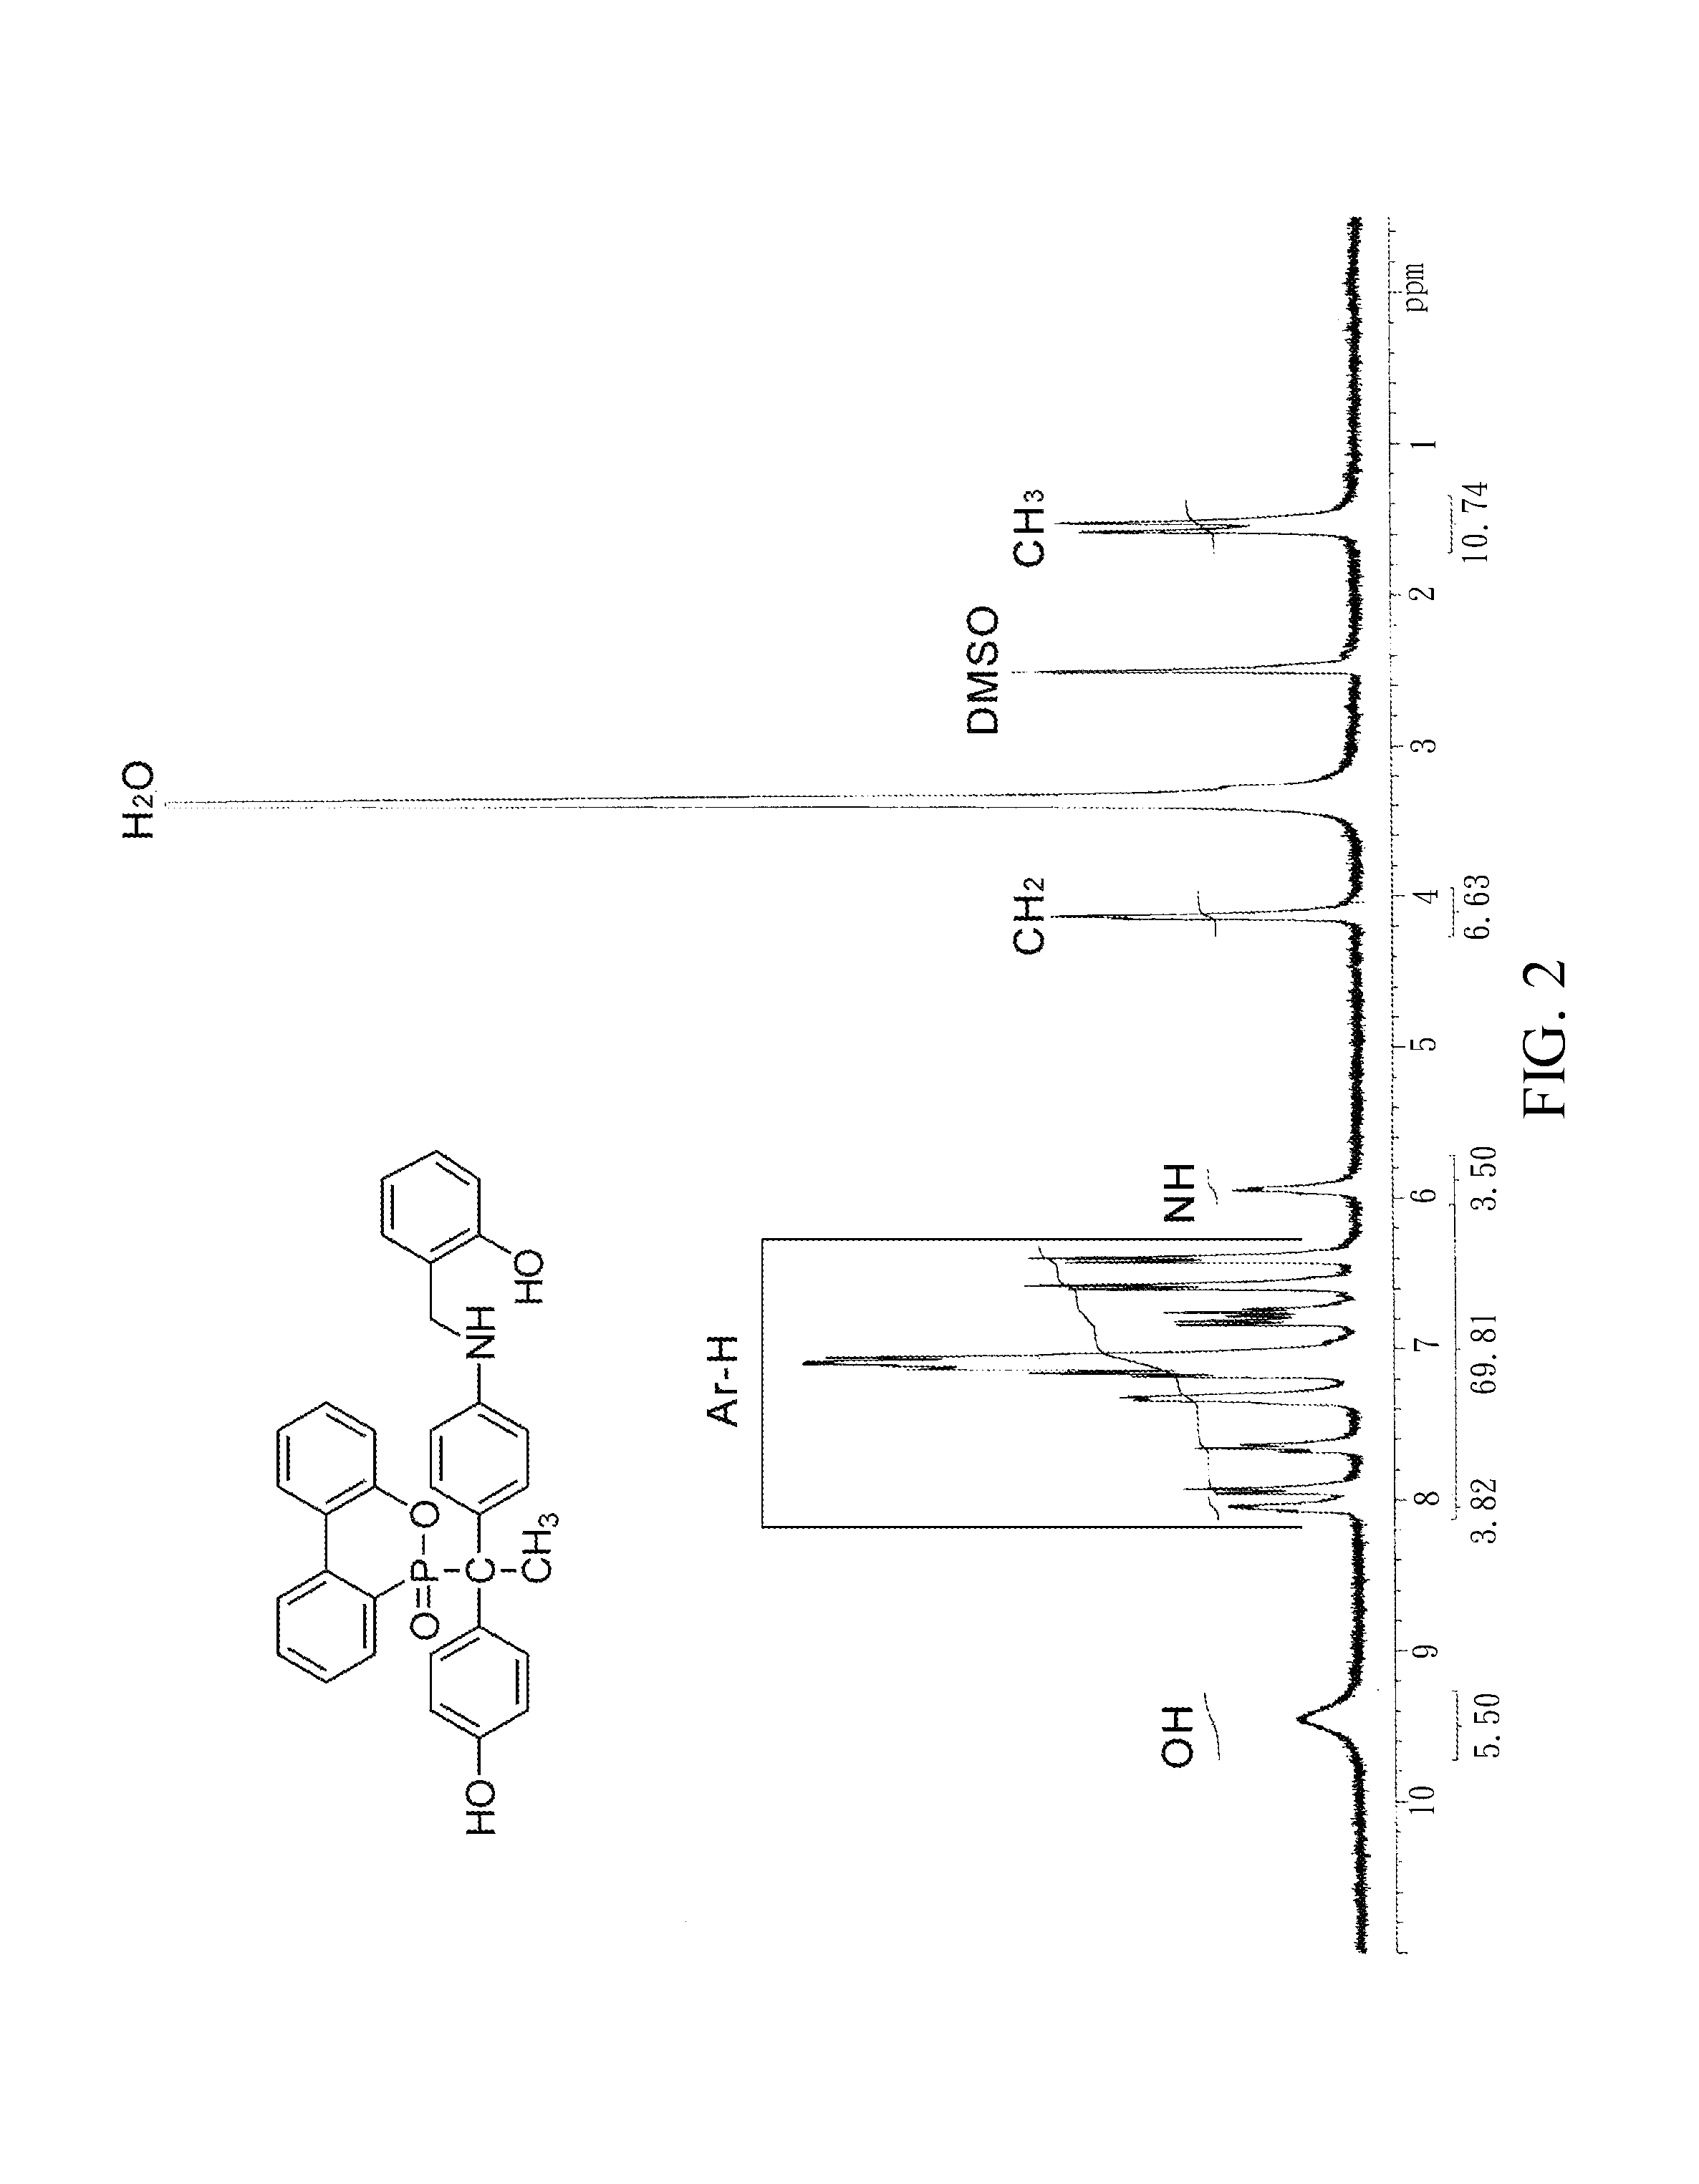 Preparation and application of propargyl ether-containing benzoxazine with high-TG characteristic